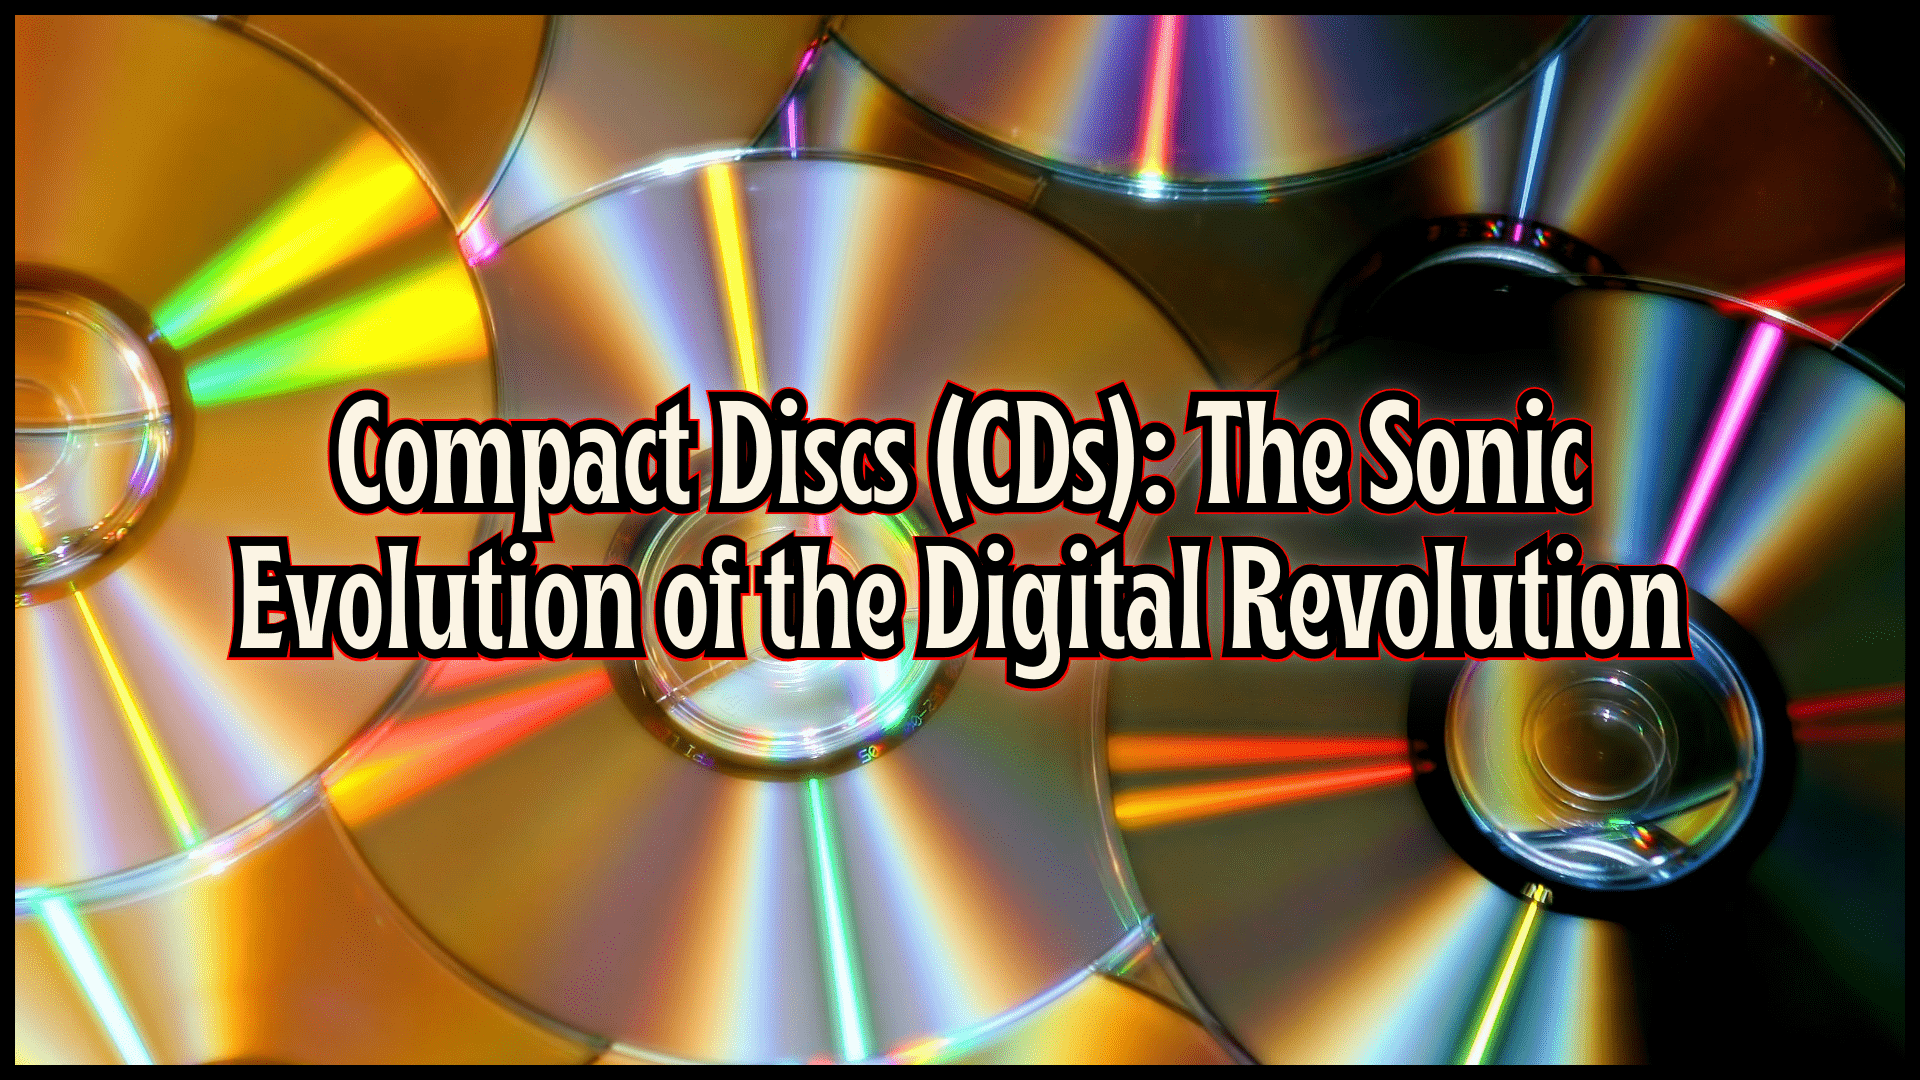 Compact Discs (CDs): The Sonic Evolution of the Digital Revolution